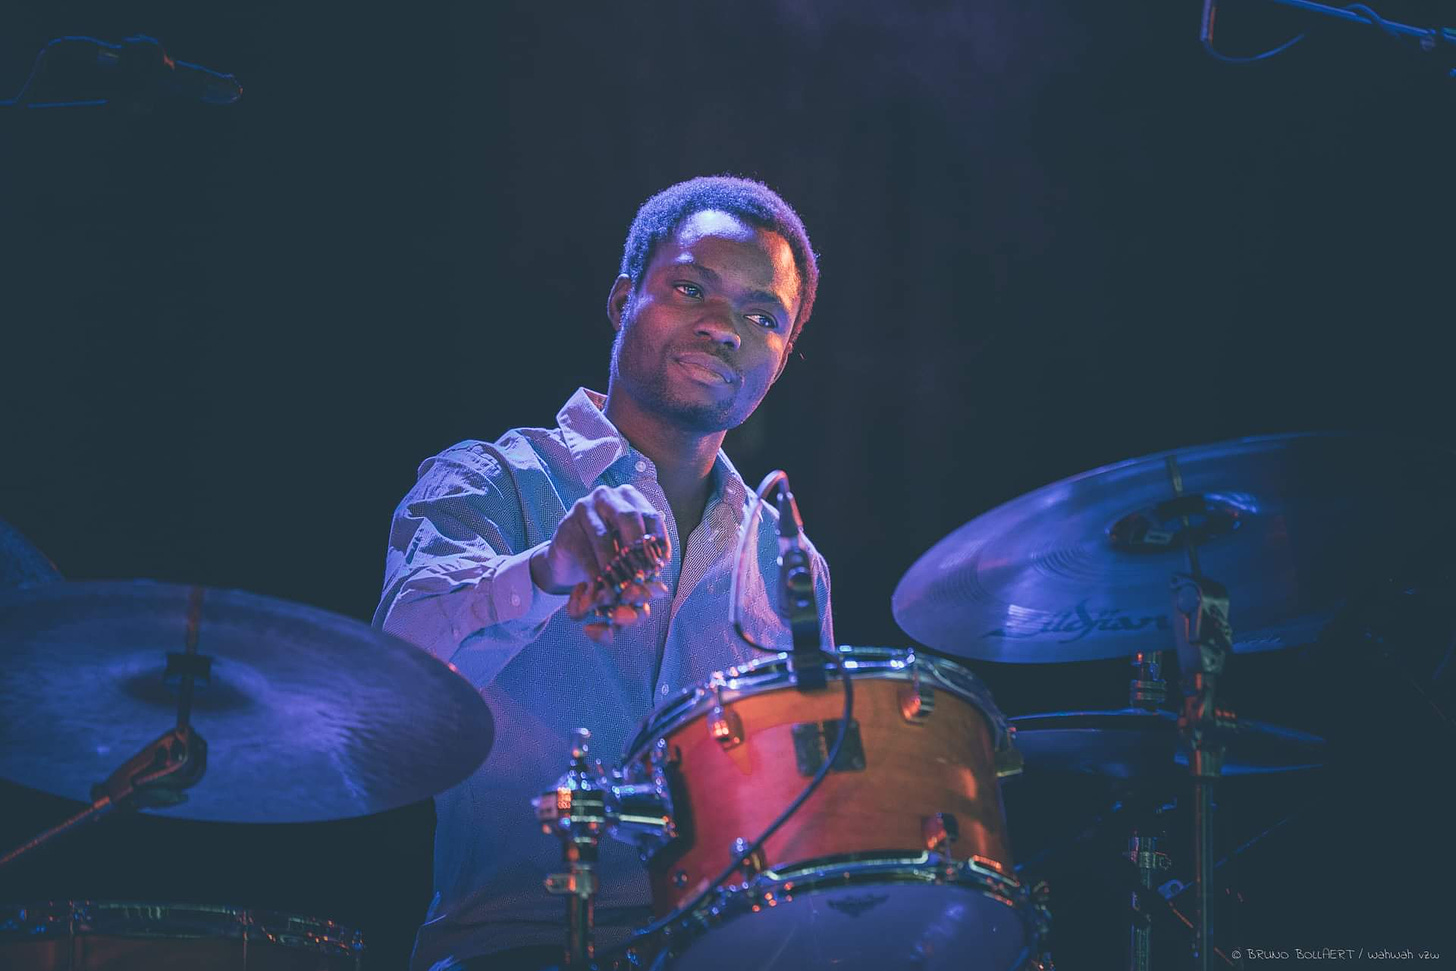 A man sits at a drum set holding an instrument with small bells in his hand. He appears to be listening to the music.